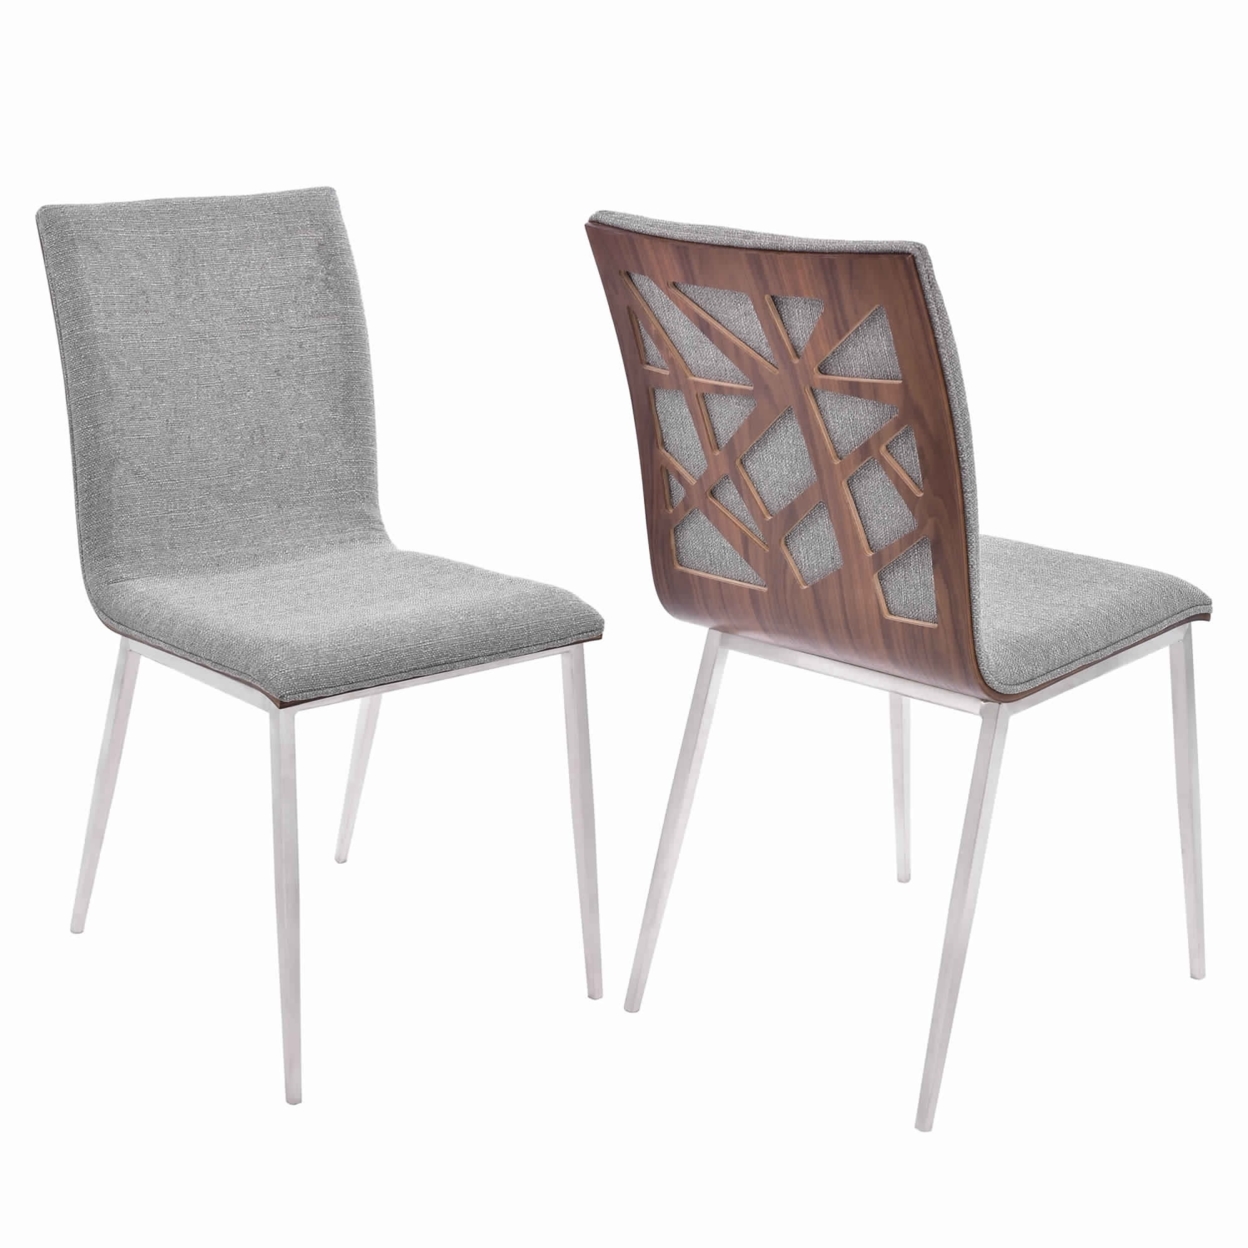 Fabric Dining Chair With Wood Back And Metal Legs, Set Of 2, Brown And Gray- Saltoro Sherpi